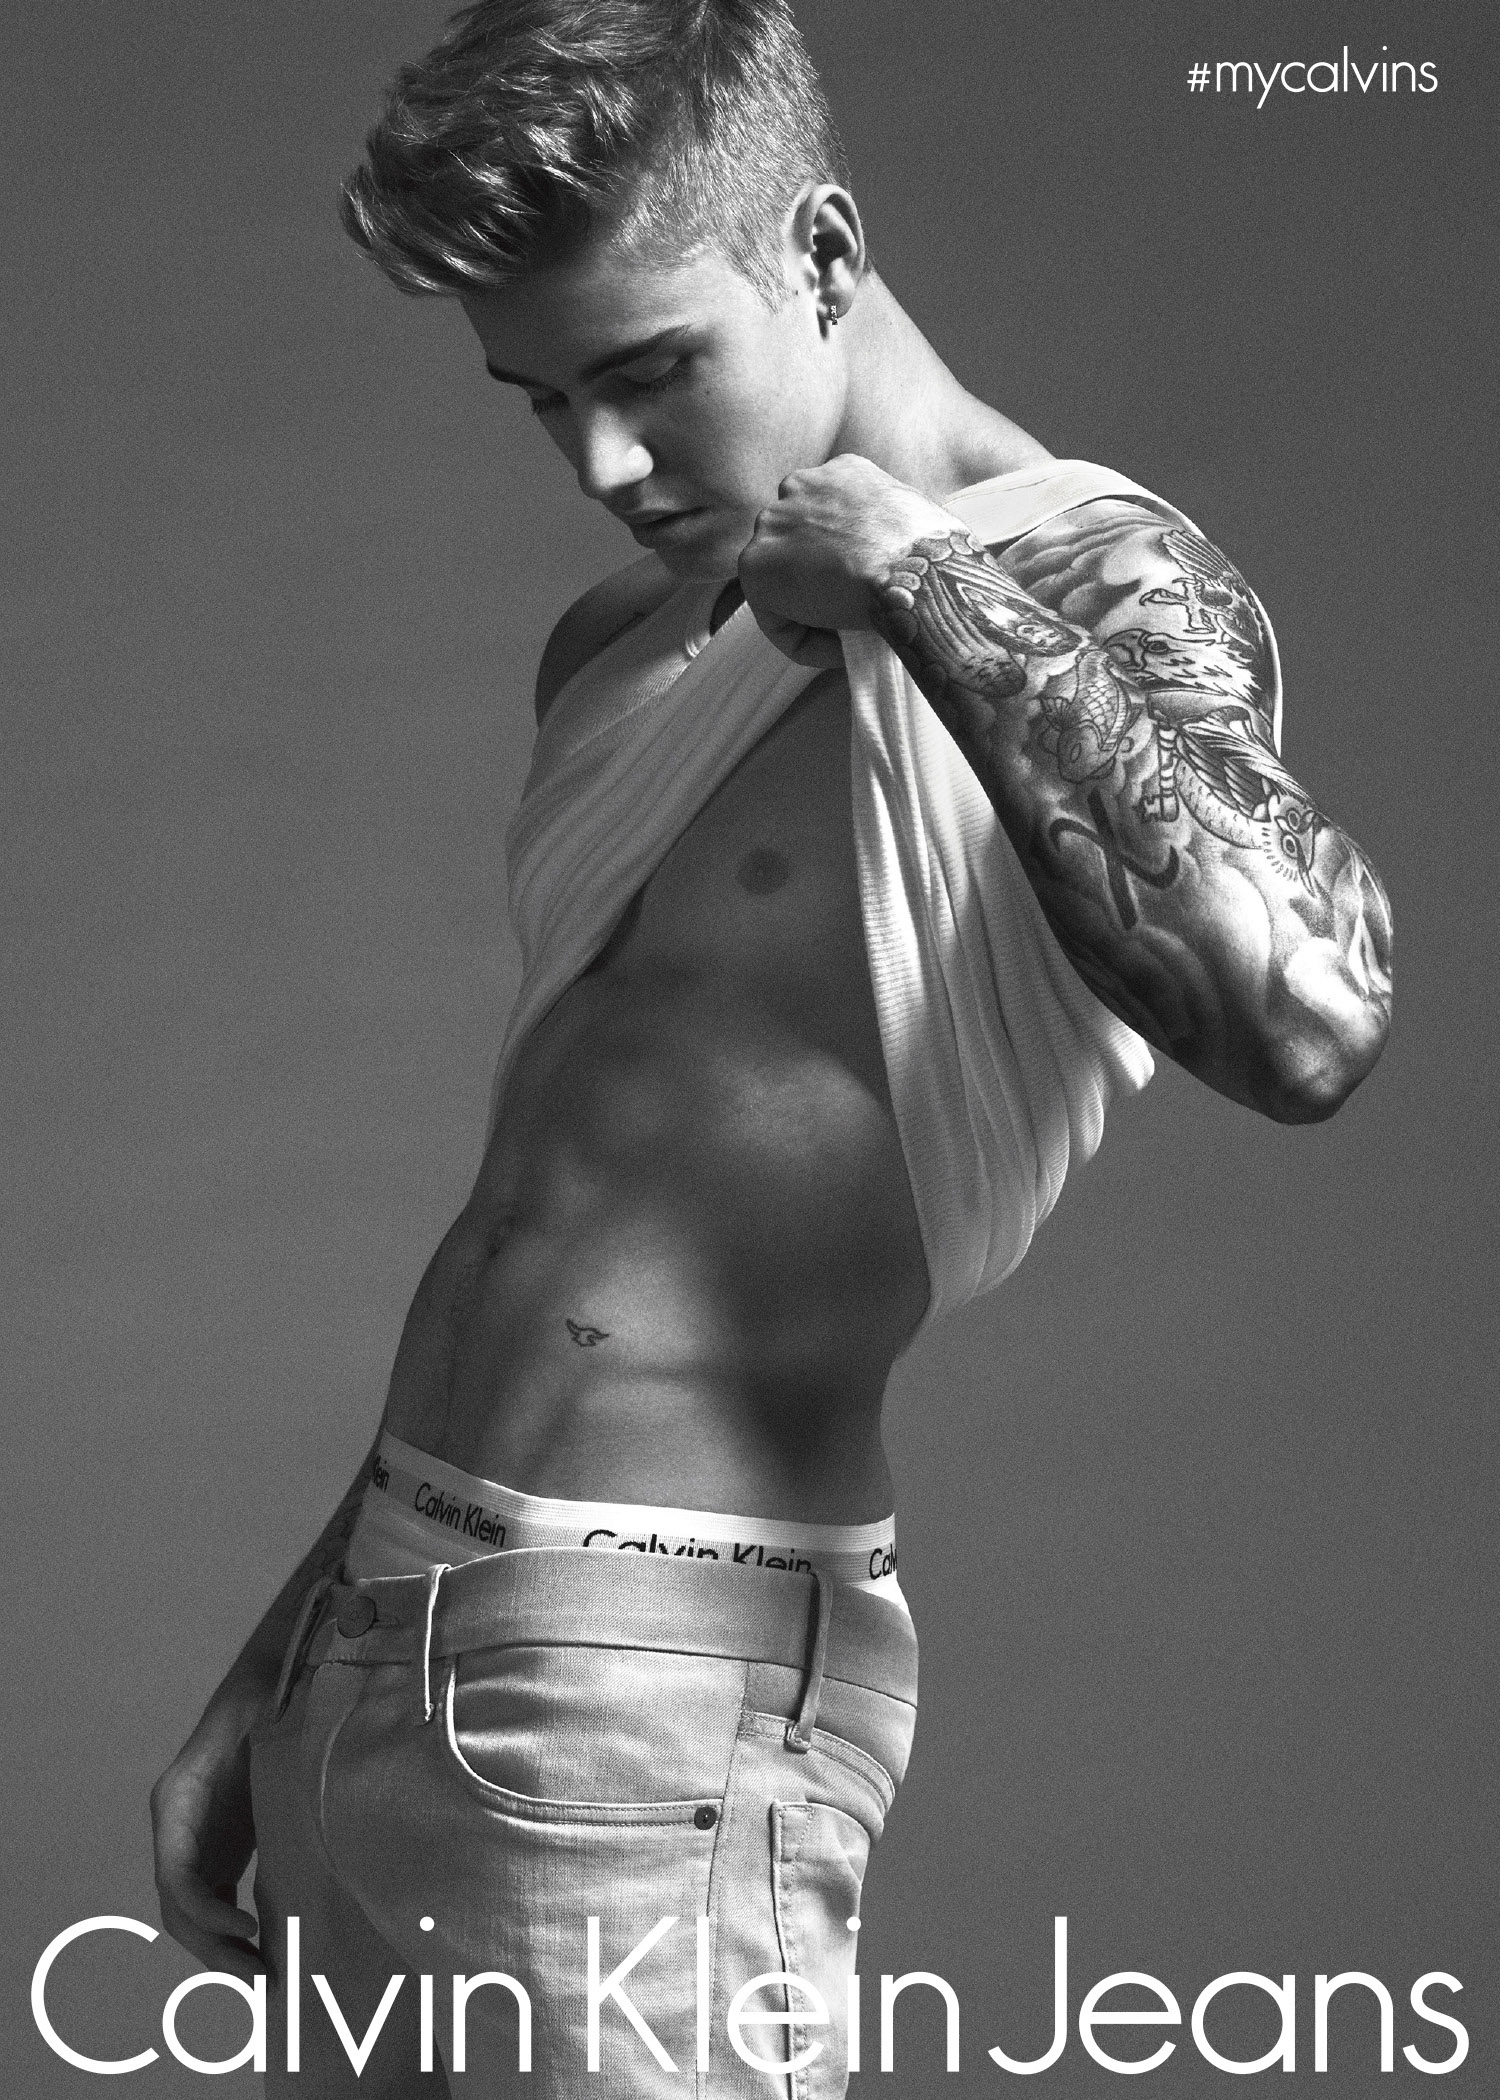 More Deets On The Justin Bieber Calvin Klein Underwear Campaign - Daily